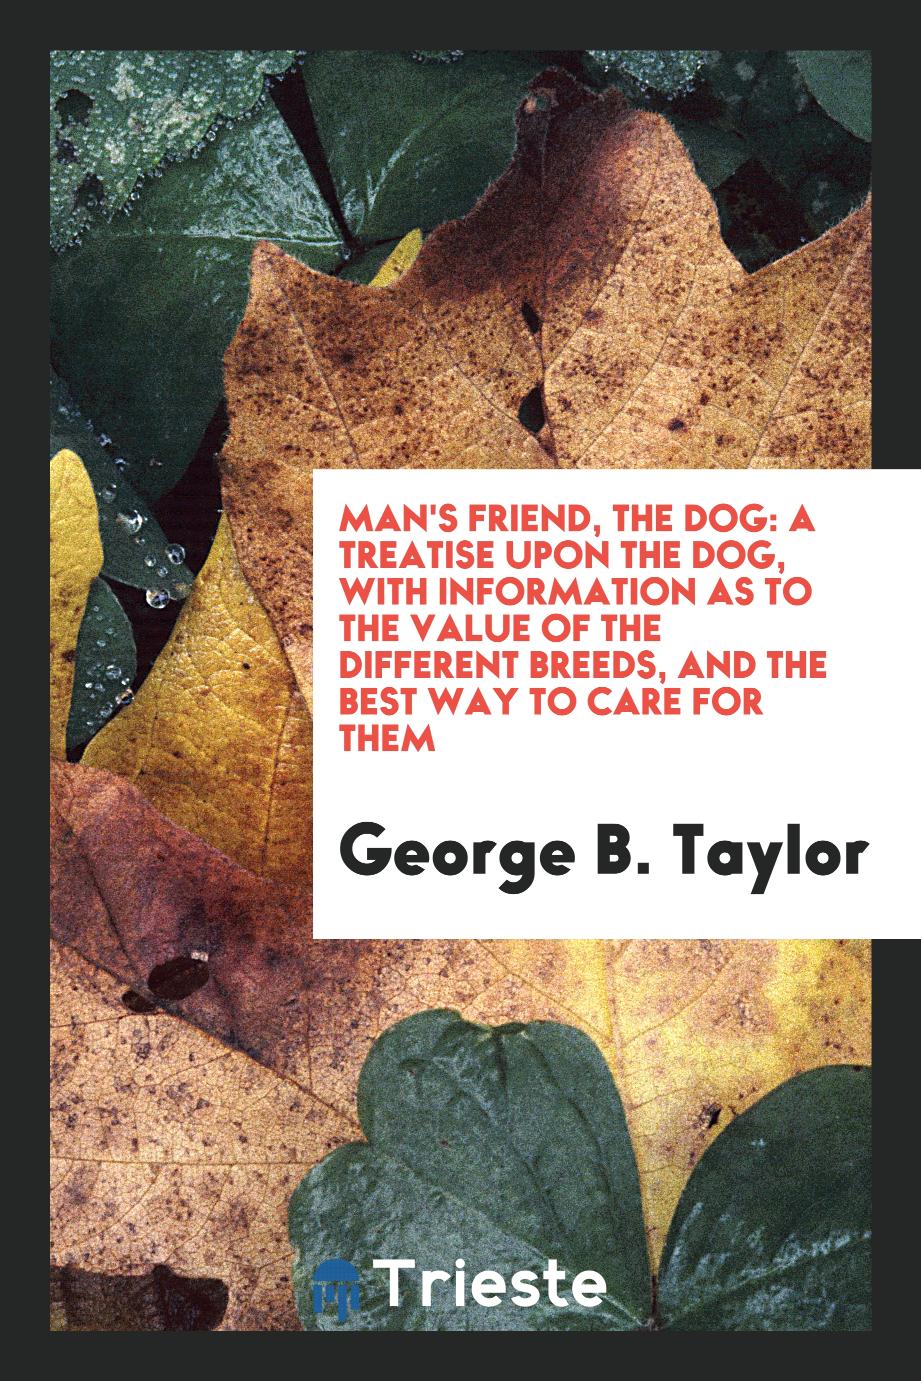 Man's Friend, the Dog: A treatise upon the dog, with information as to the value of the different breeds, and the best way to care for them